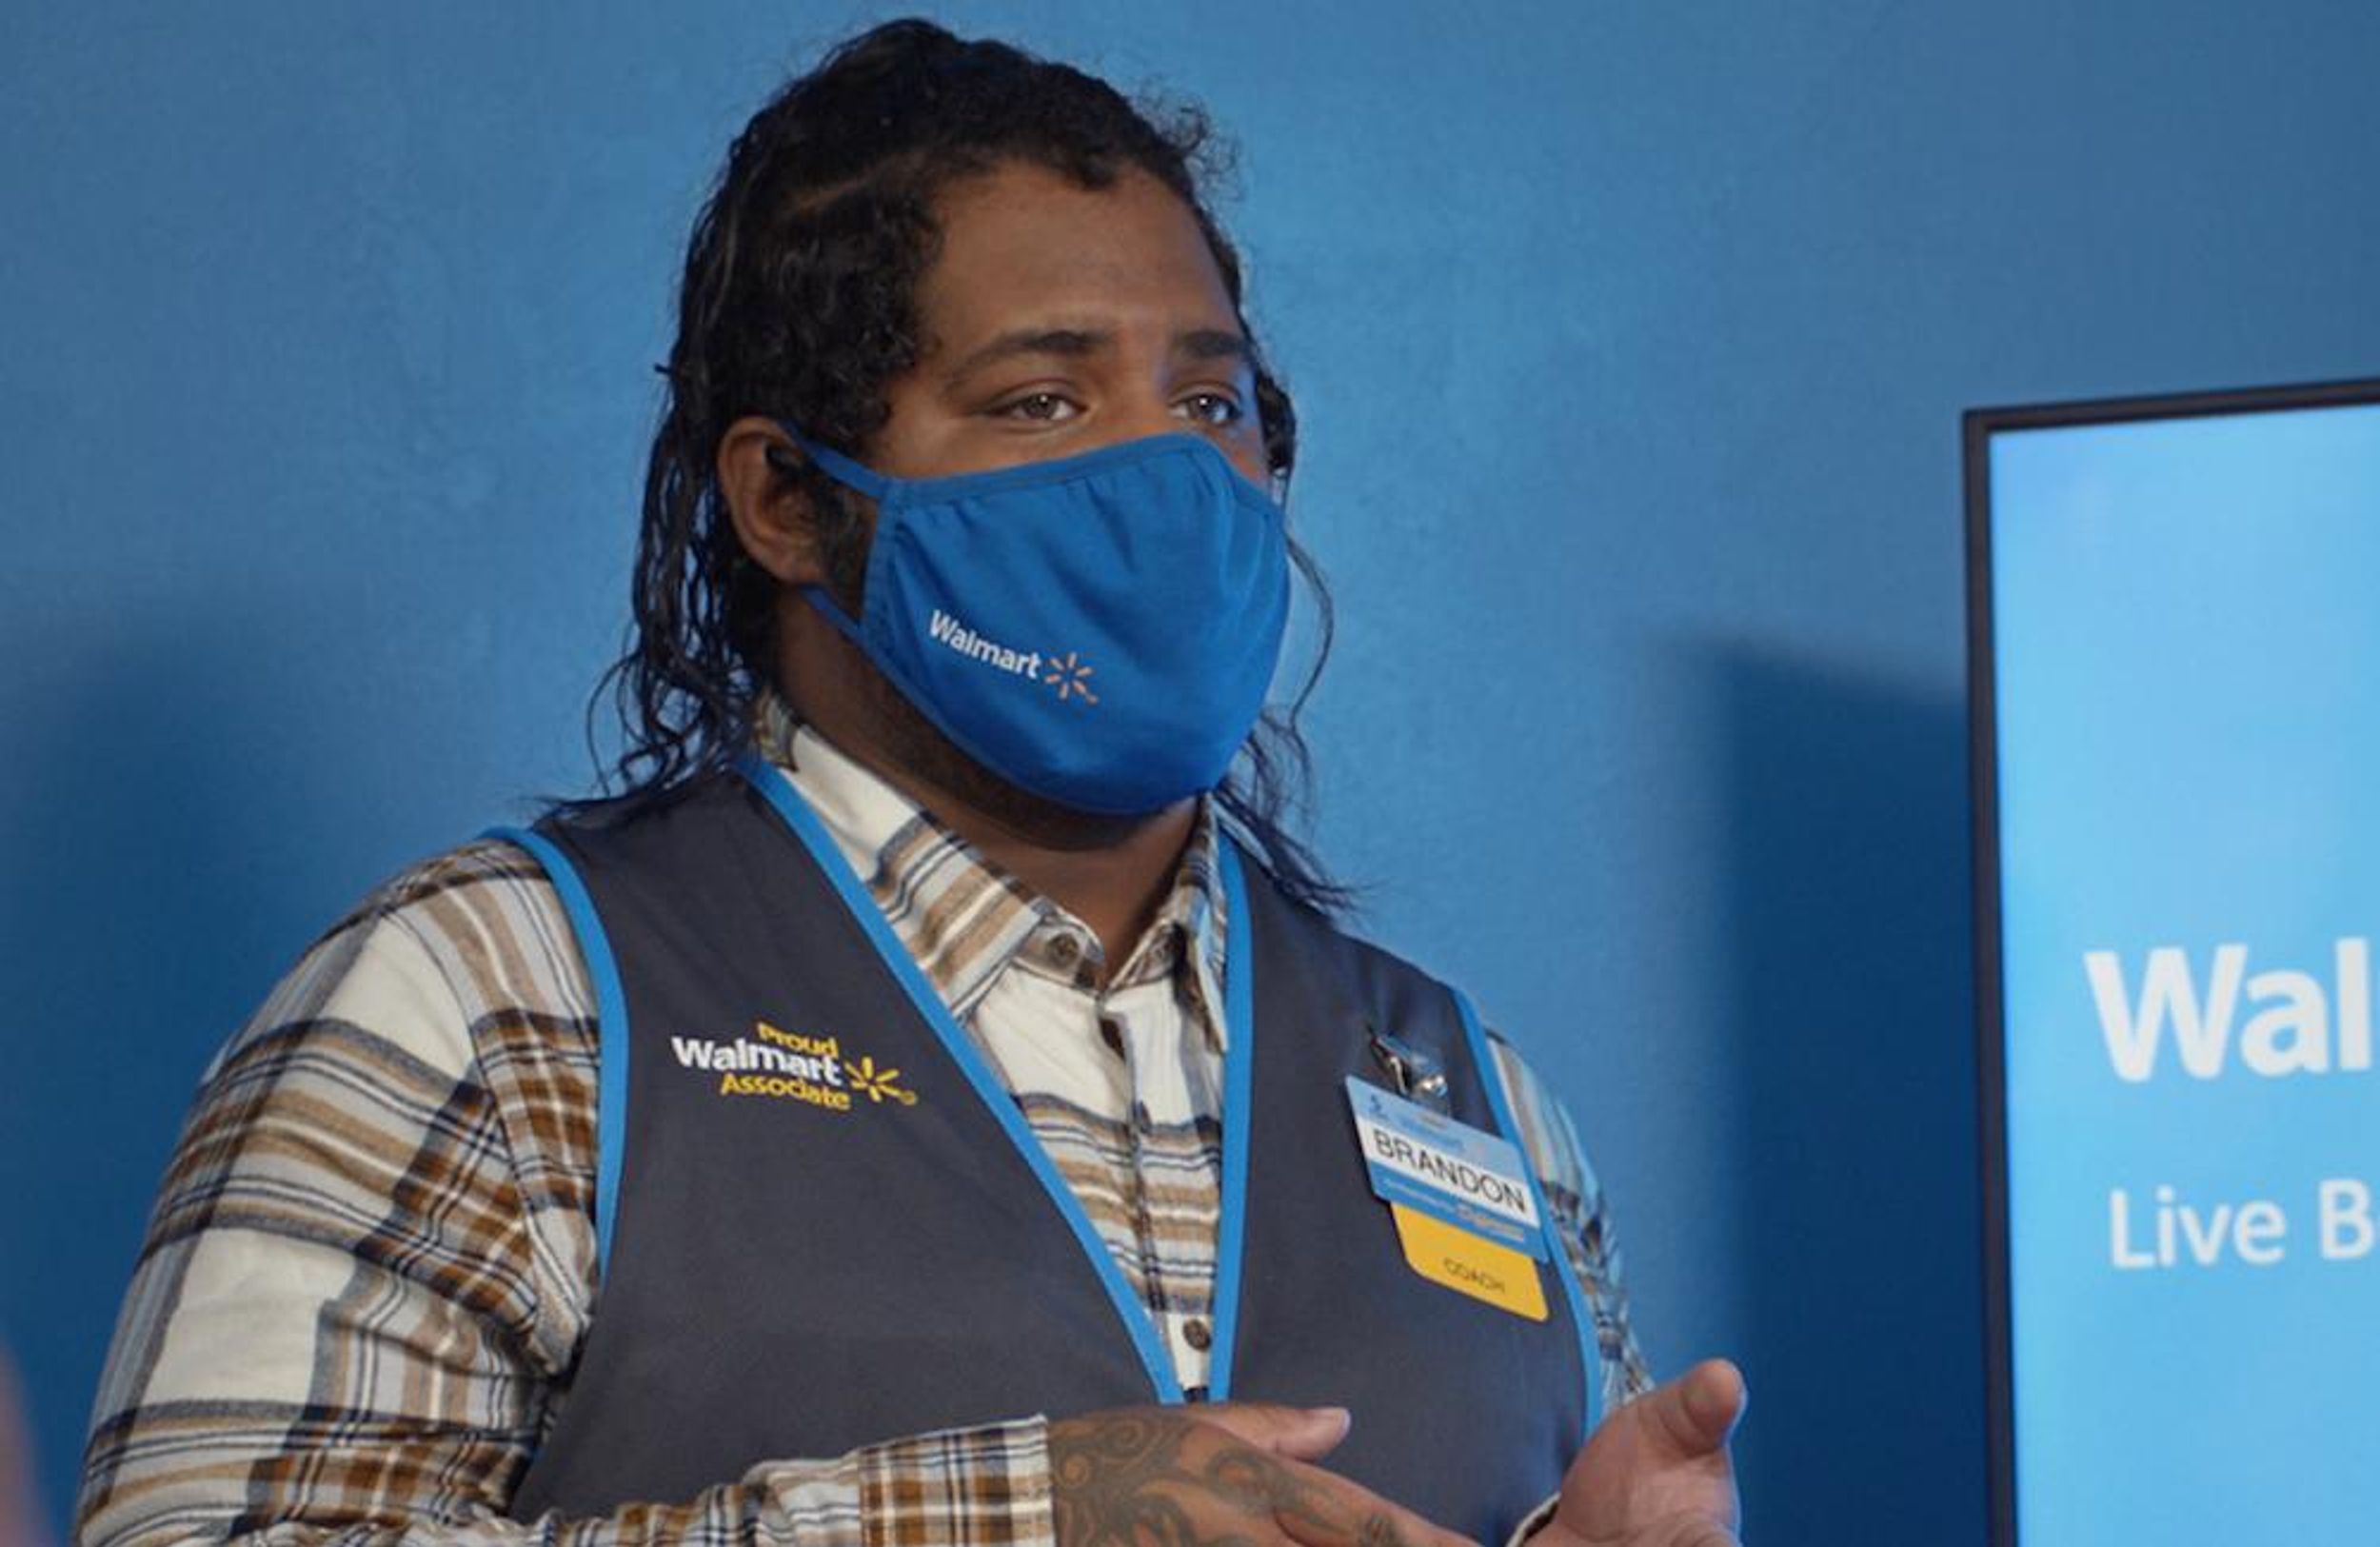 A masked Walmart employee giving a presentation in a room with blue walls